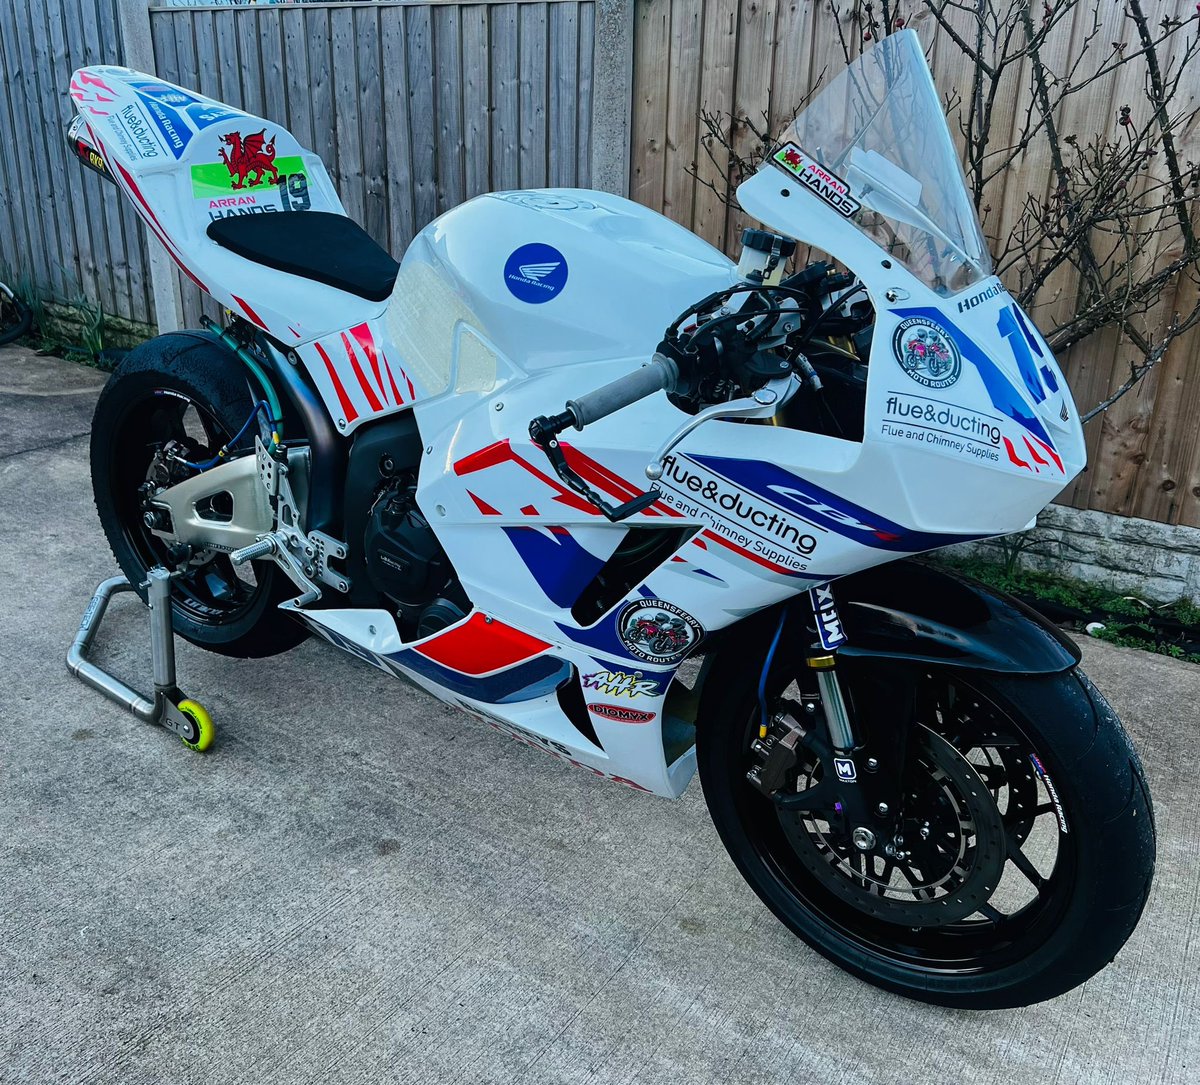 @QueensferryMoto are sponsoring @ArranHands19 racing in 2024 so we’re hosting a Tour to the @S100isleofman - #Southern100Tour - 8th - 12th July, 4 nights DB&B - Farmhouse in Castletown sleeps 10 - Return ferries Book up, get involved & enjoy the racing 👊👌🇮🇲 DM for info👍